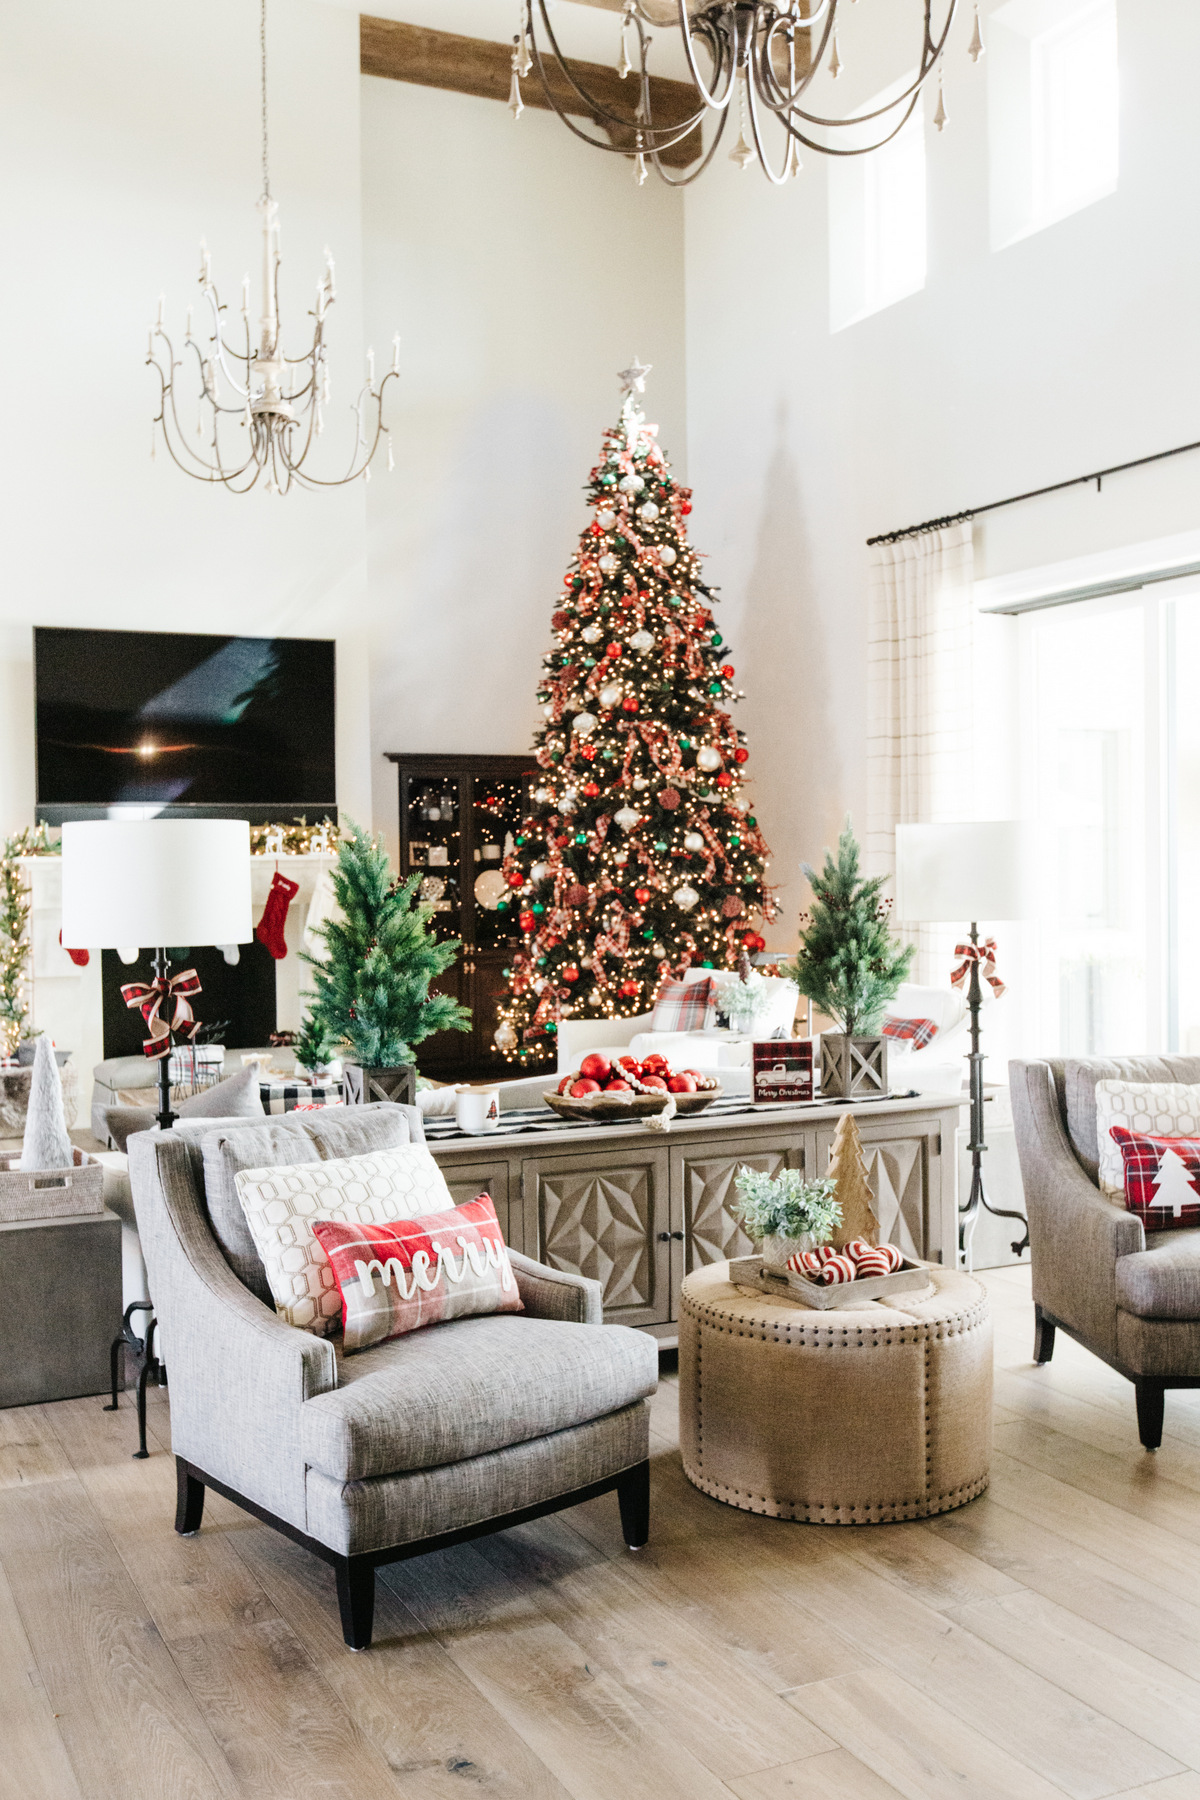 Stunning Family Room Decorated for Christmas | The TomKat Studio